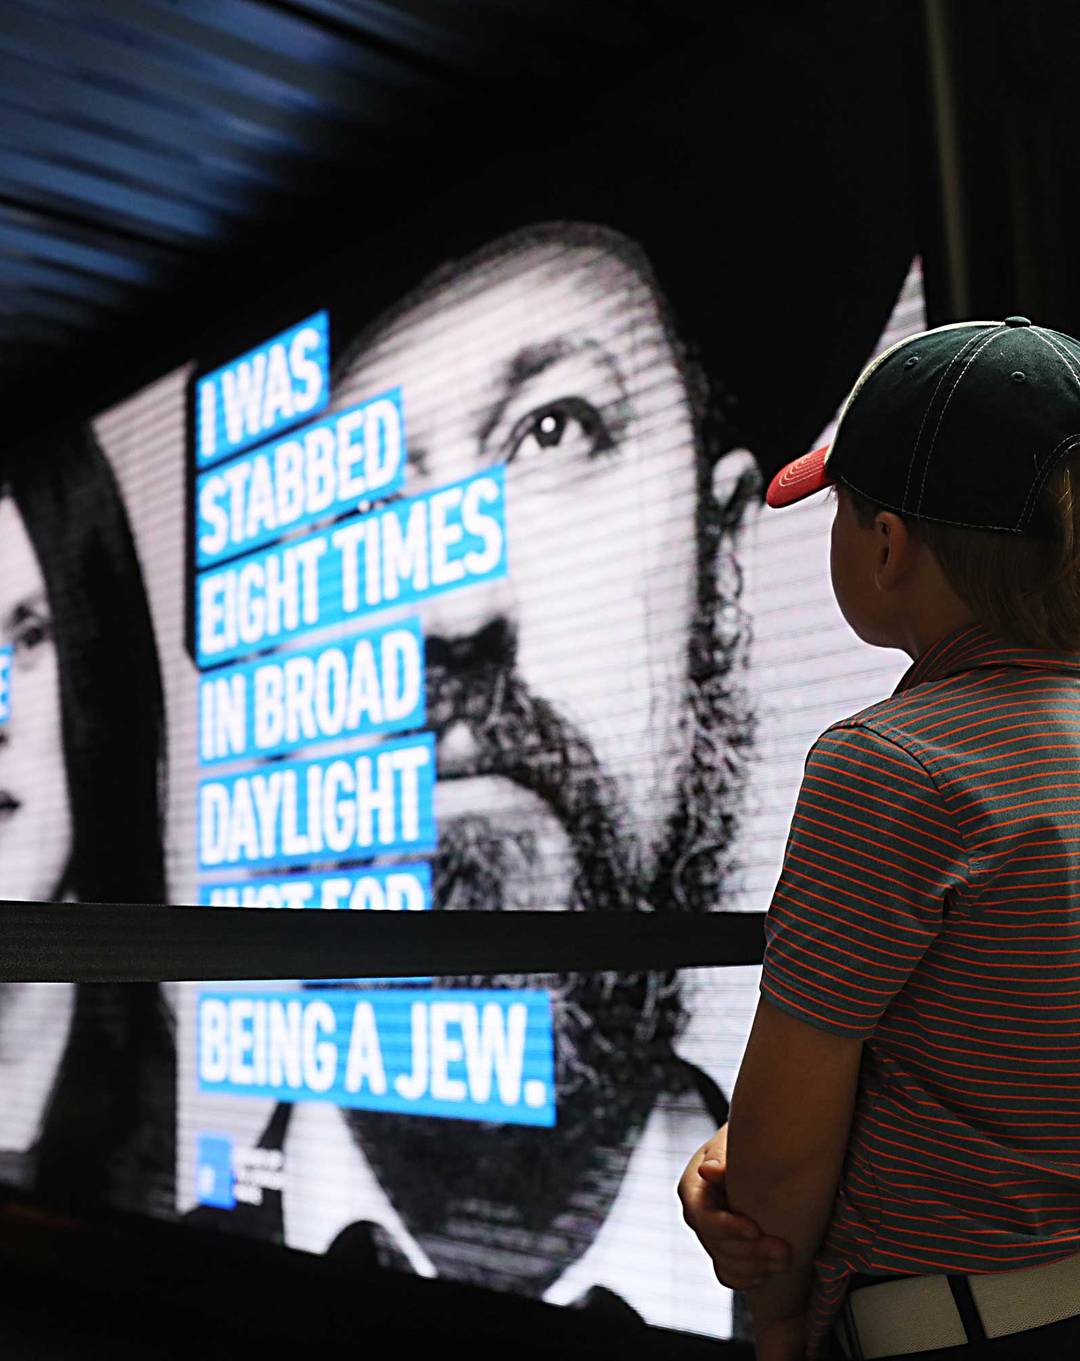 A child watches the press conference at North Station for the Face Jewish Hate campaign to raise public awareness against an alarming rise in antisemitism.